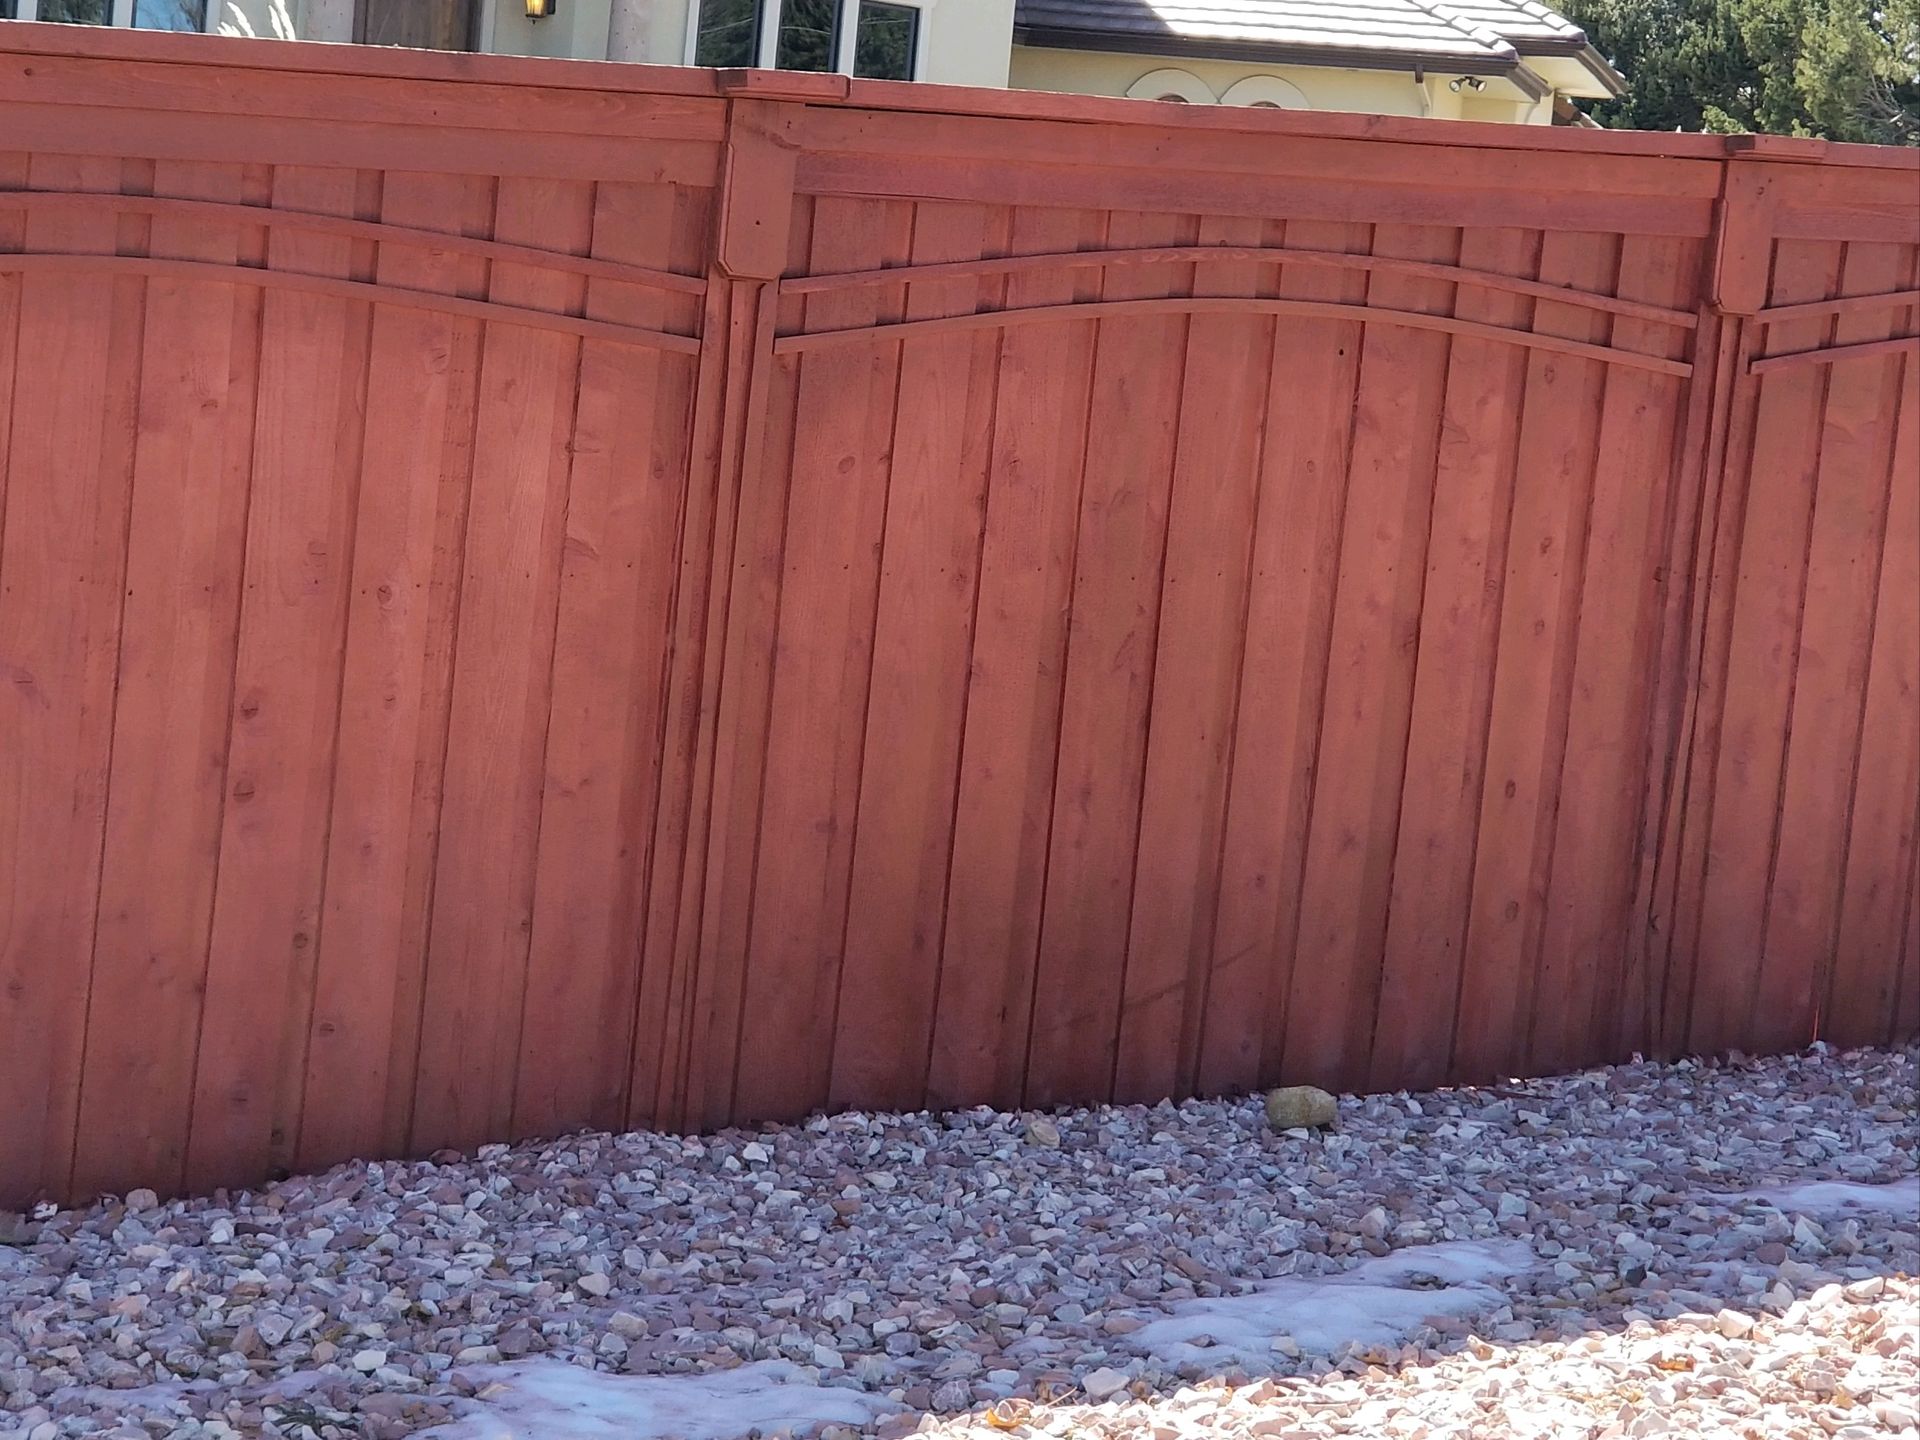 A red wooden fence is surrounded by gravel in front of a house.